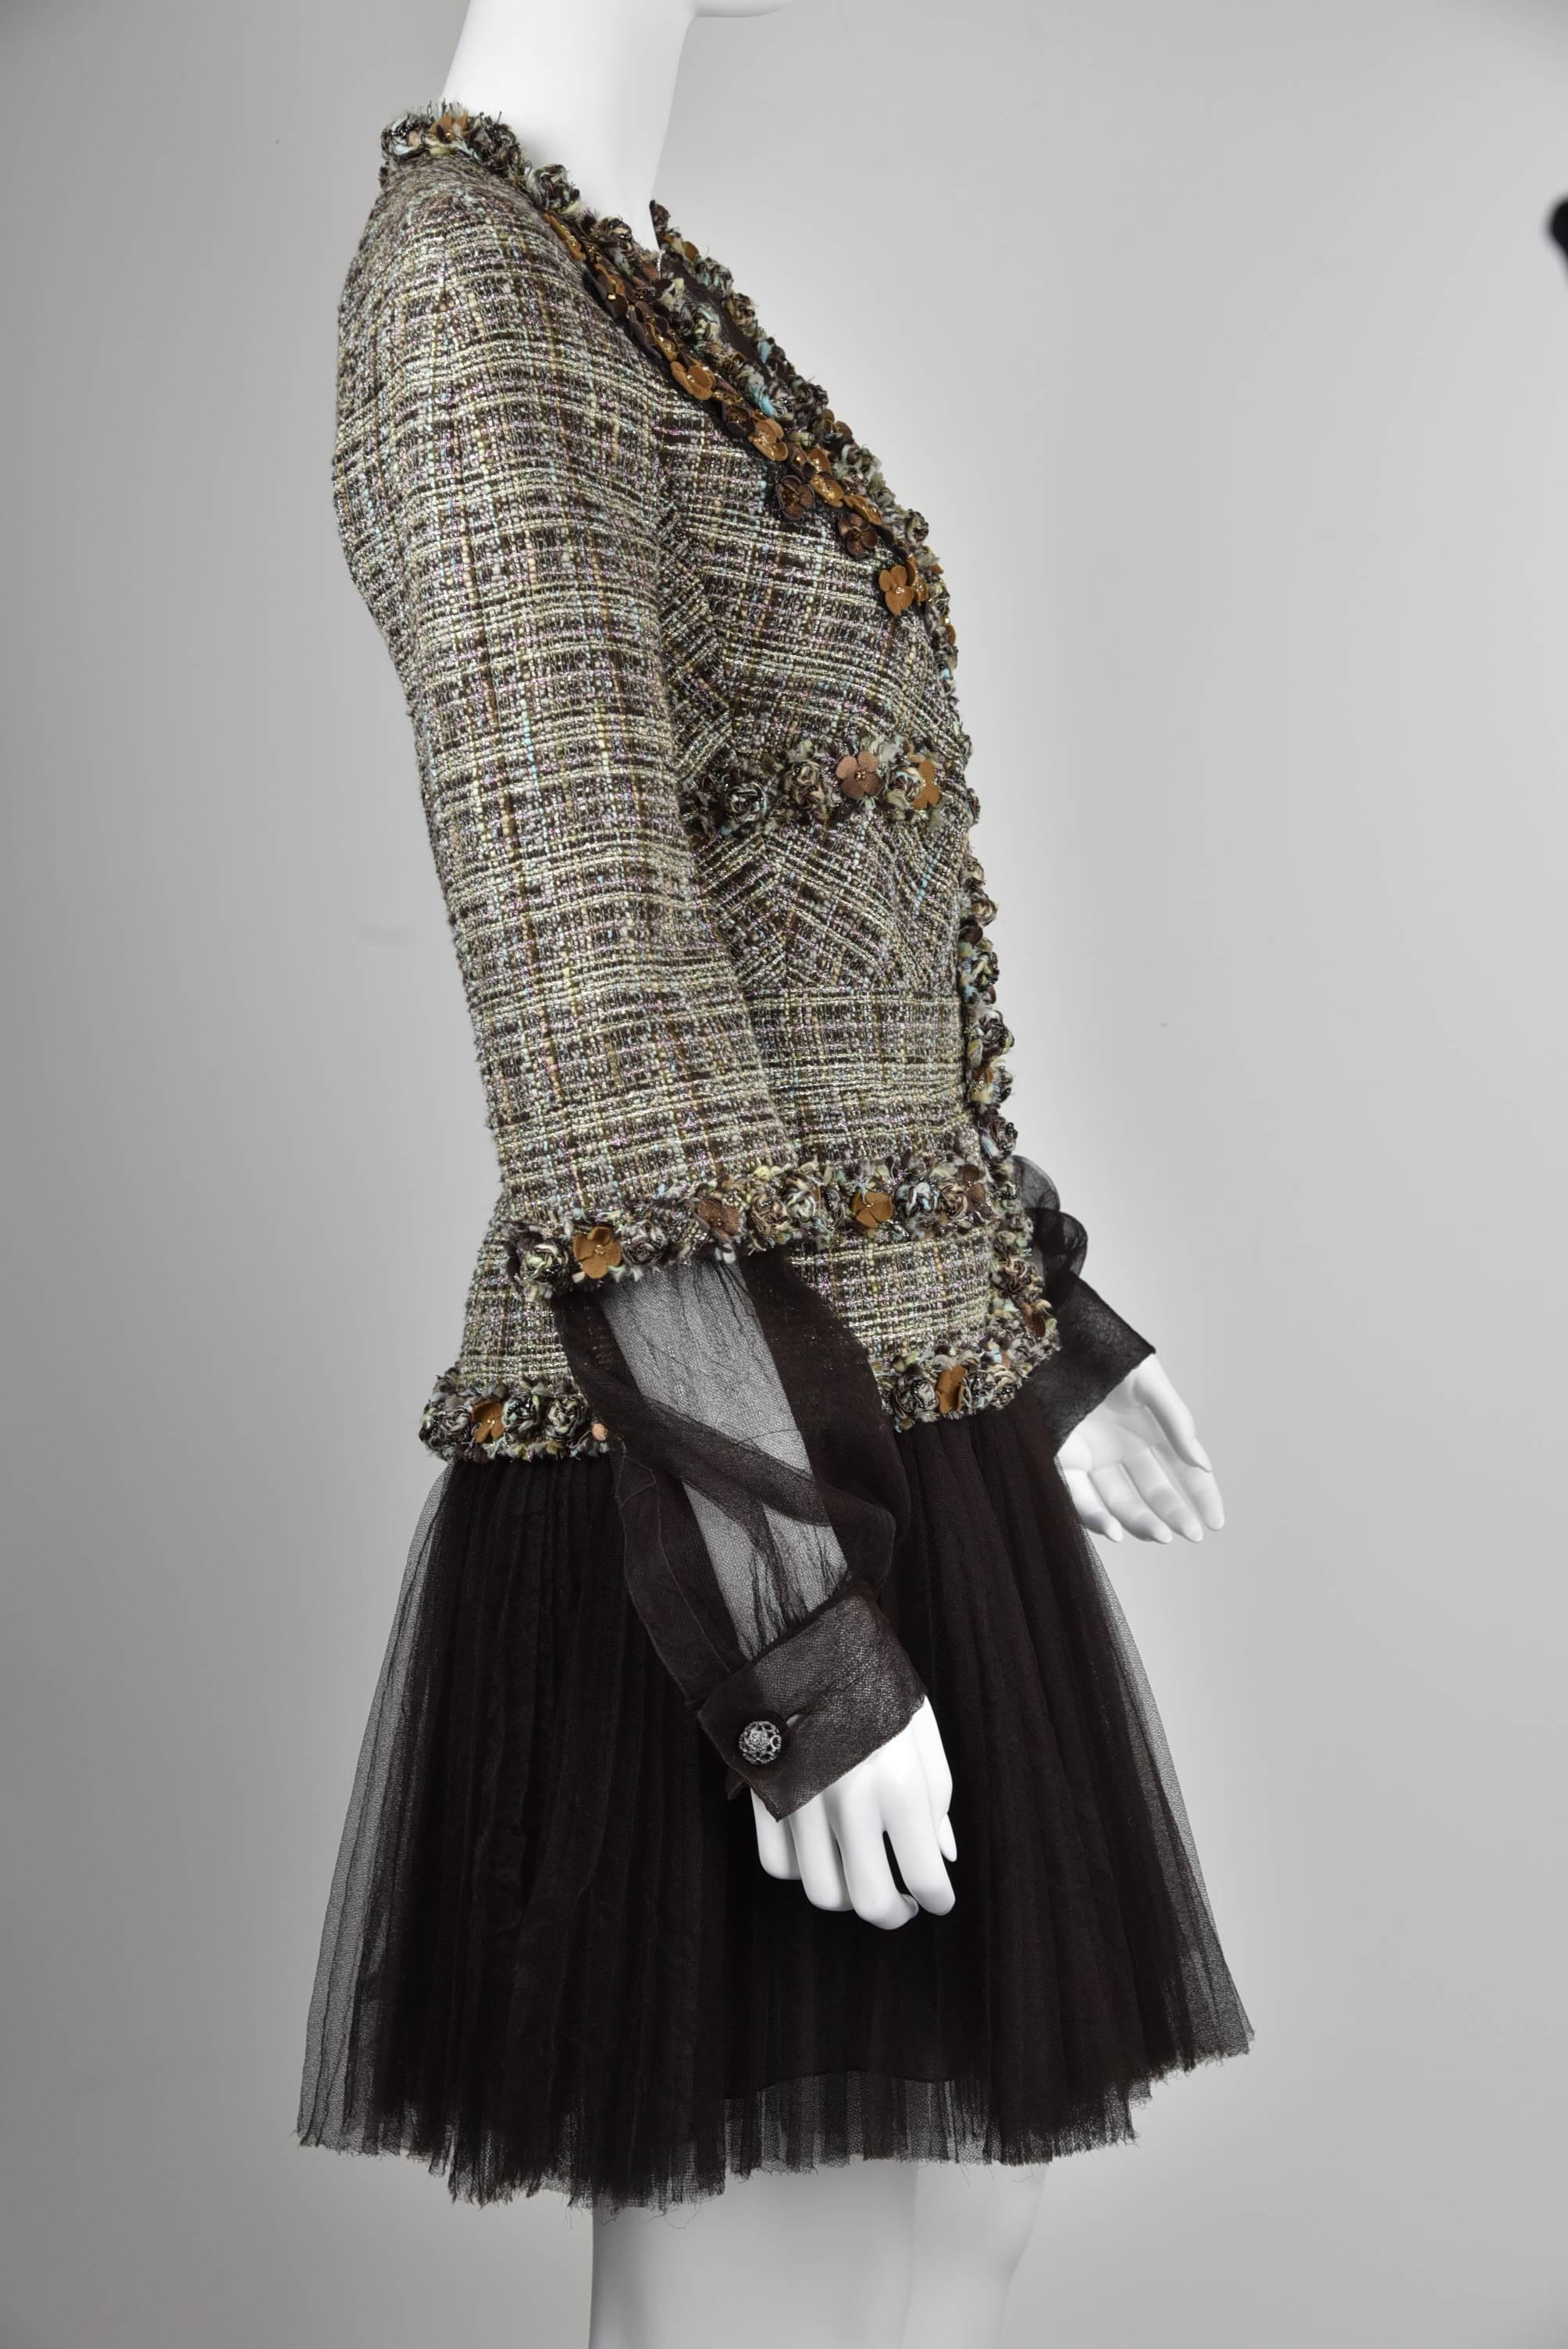 This jacket and dress ensemble is one of the most complex and beautiful Lesage designs Chanel has ever executed, as noticed during the visit of the NYC Fashion Institute of Technology when they viewed the collection.  It includes hundreds of